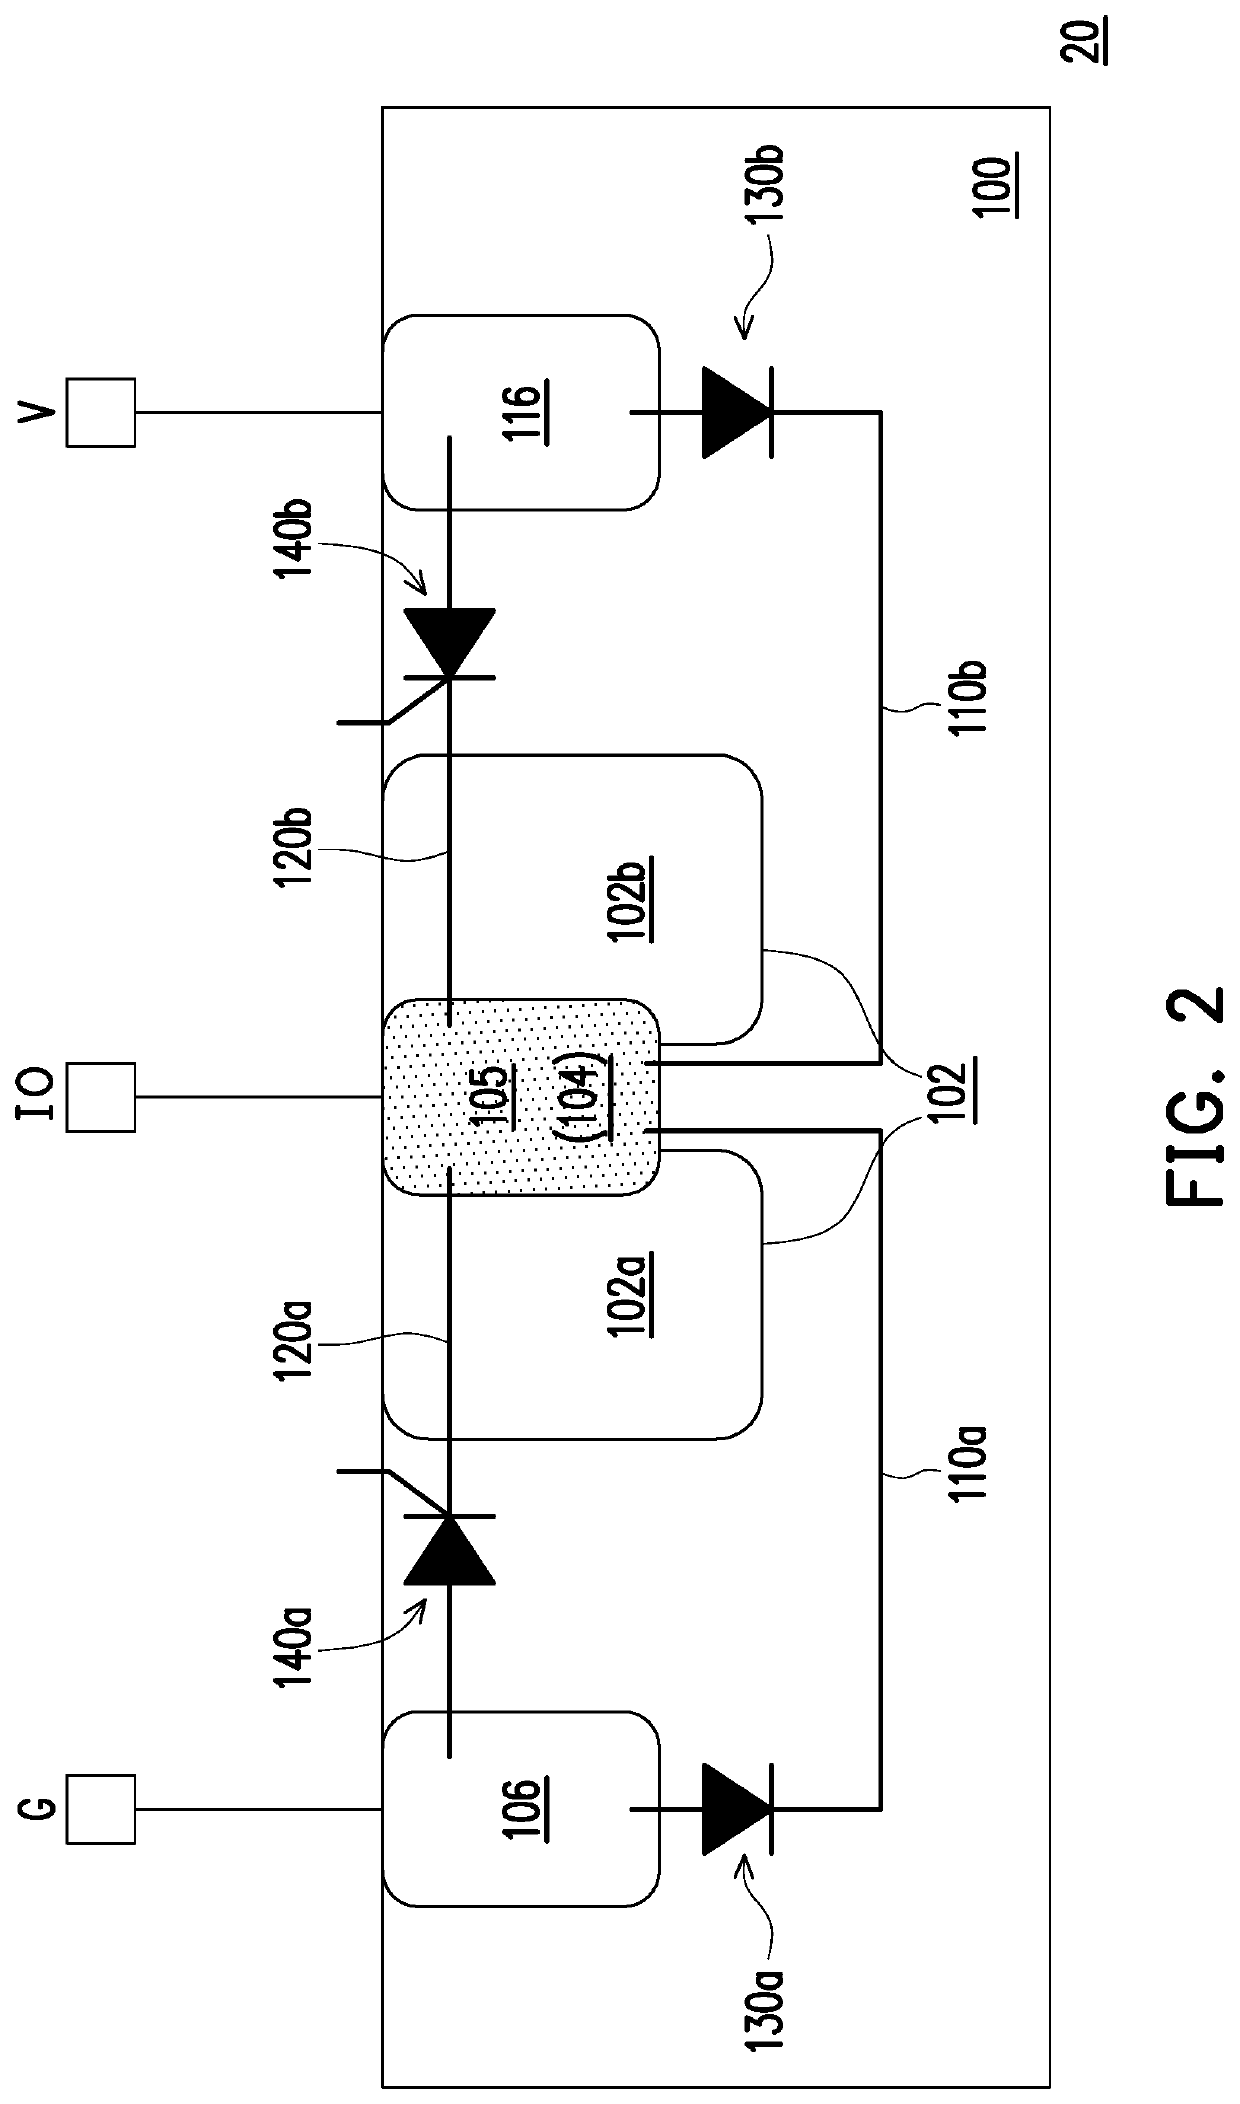 Semiconductor device with diode and silicon controlled rectifier (SCR)